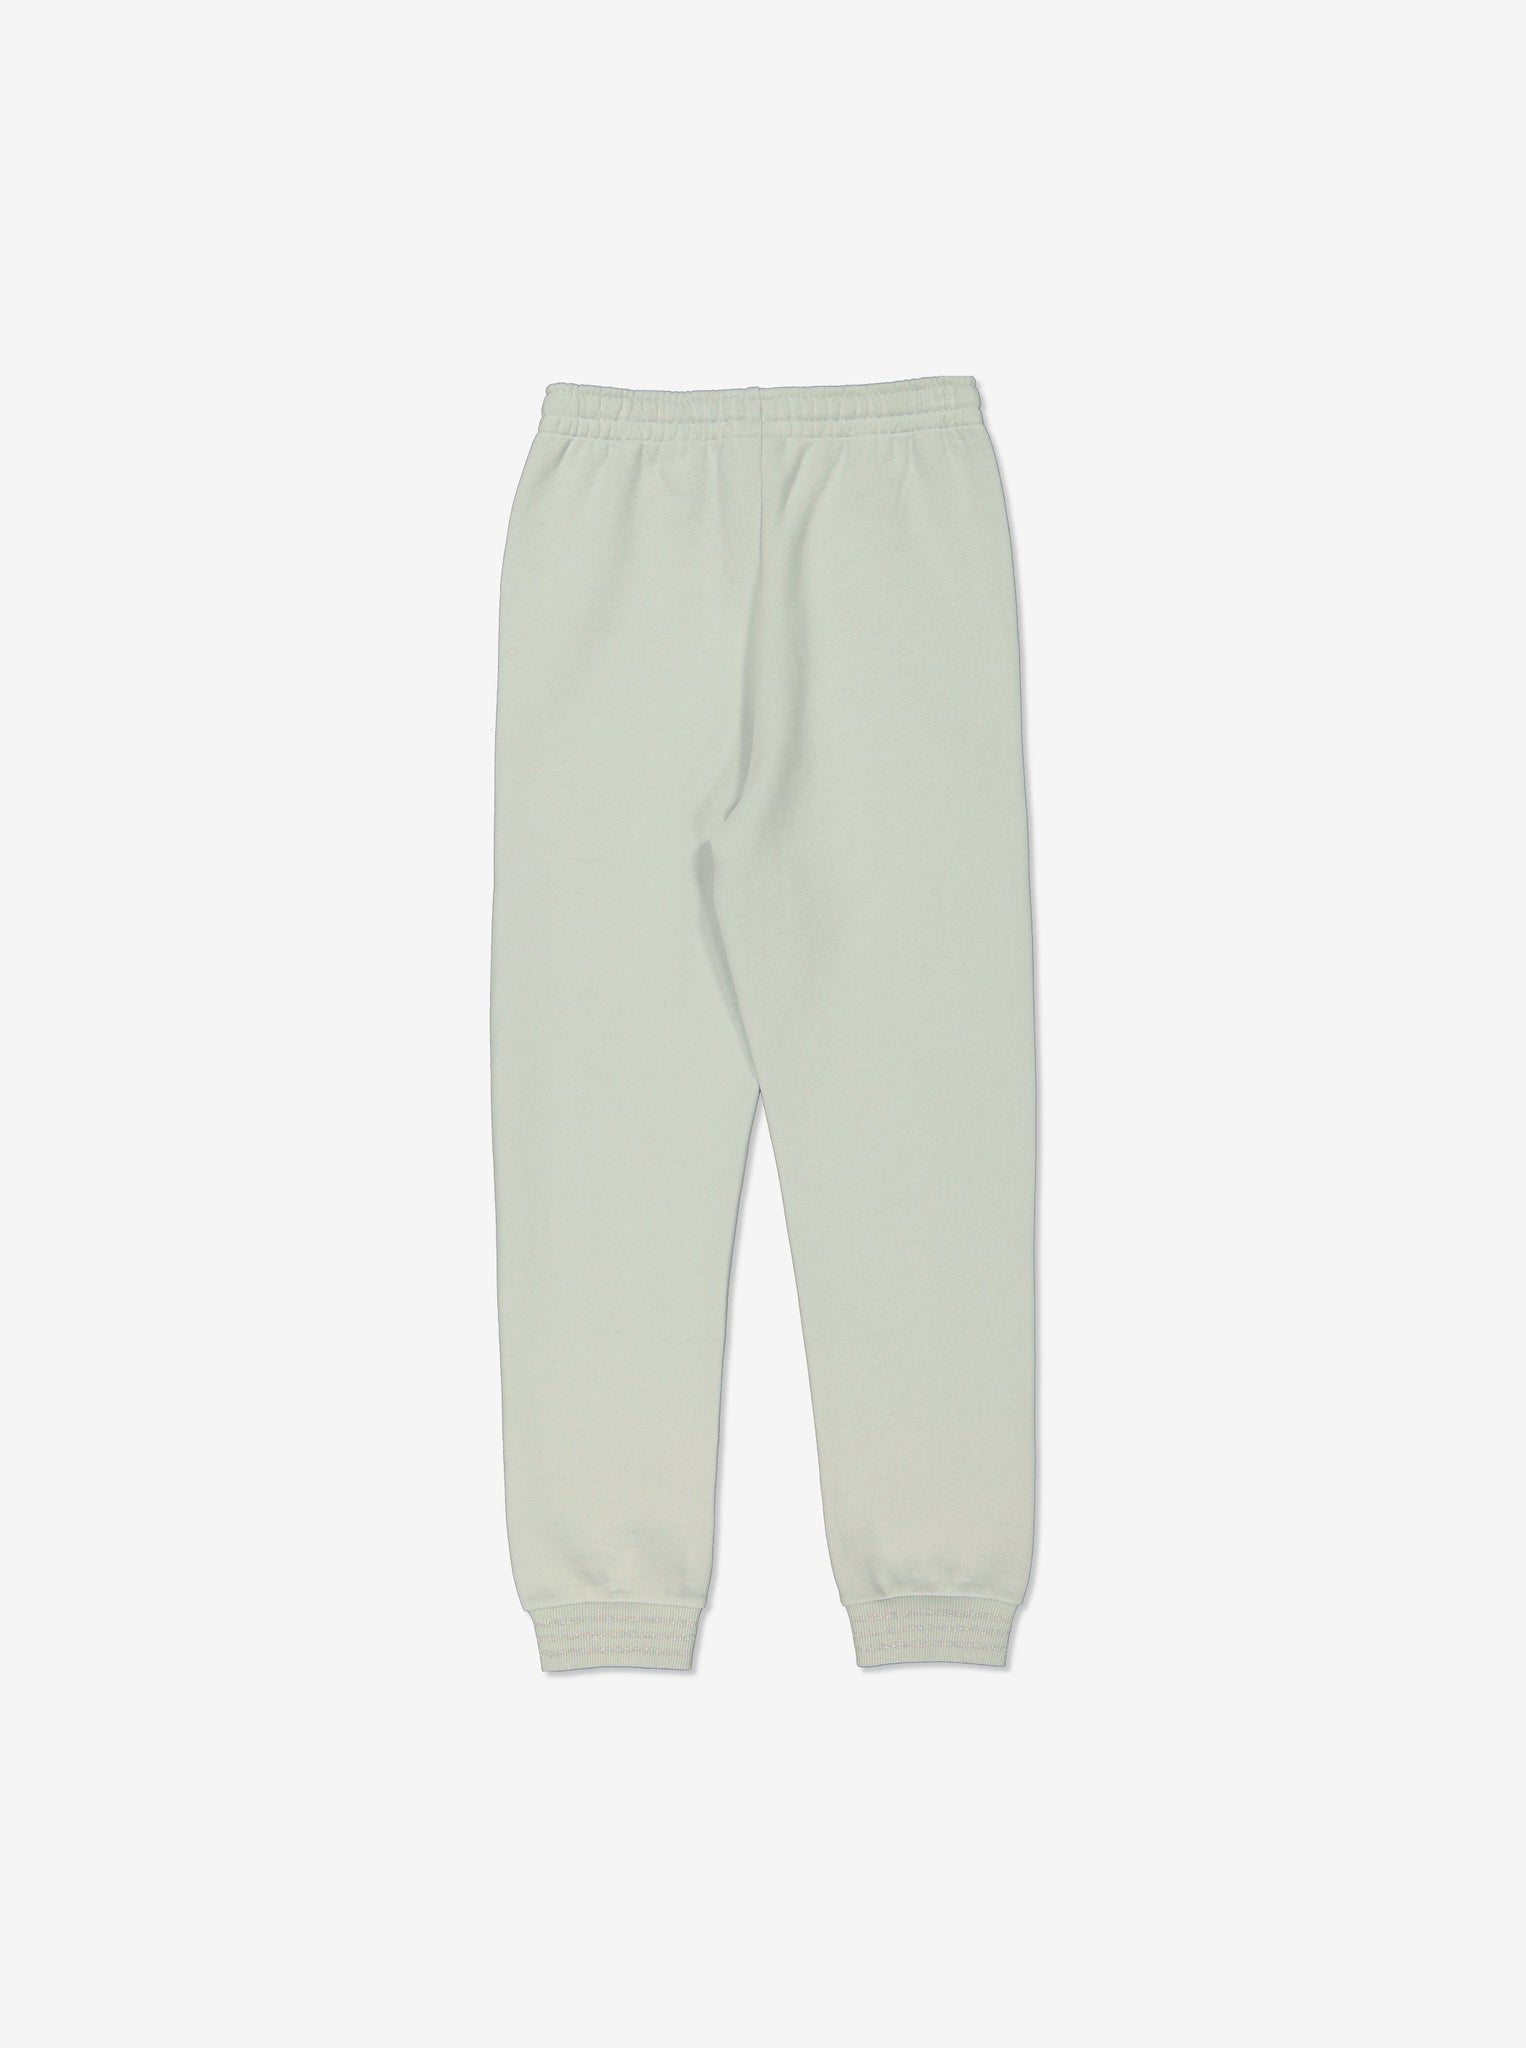  Organic Cotton Grey Kids Joggers from Polarn O. Pyret Kidswear. Made using eco-friendly materials.